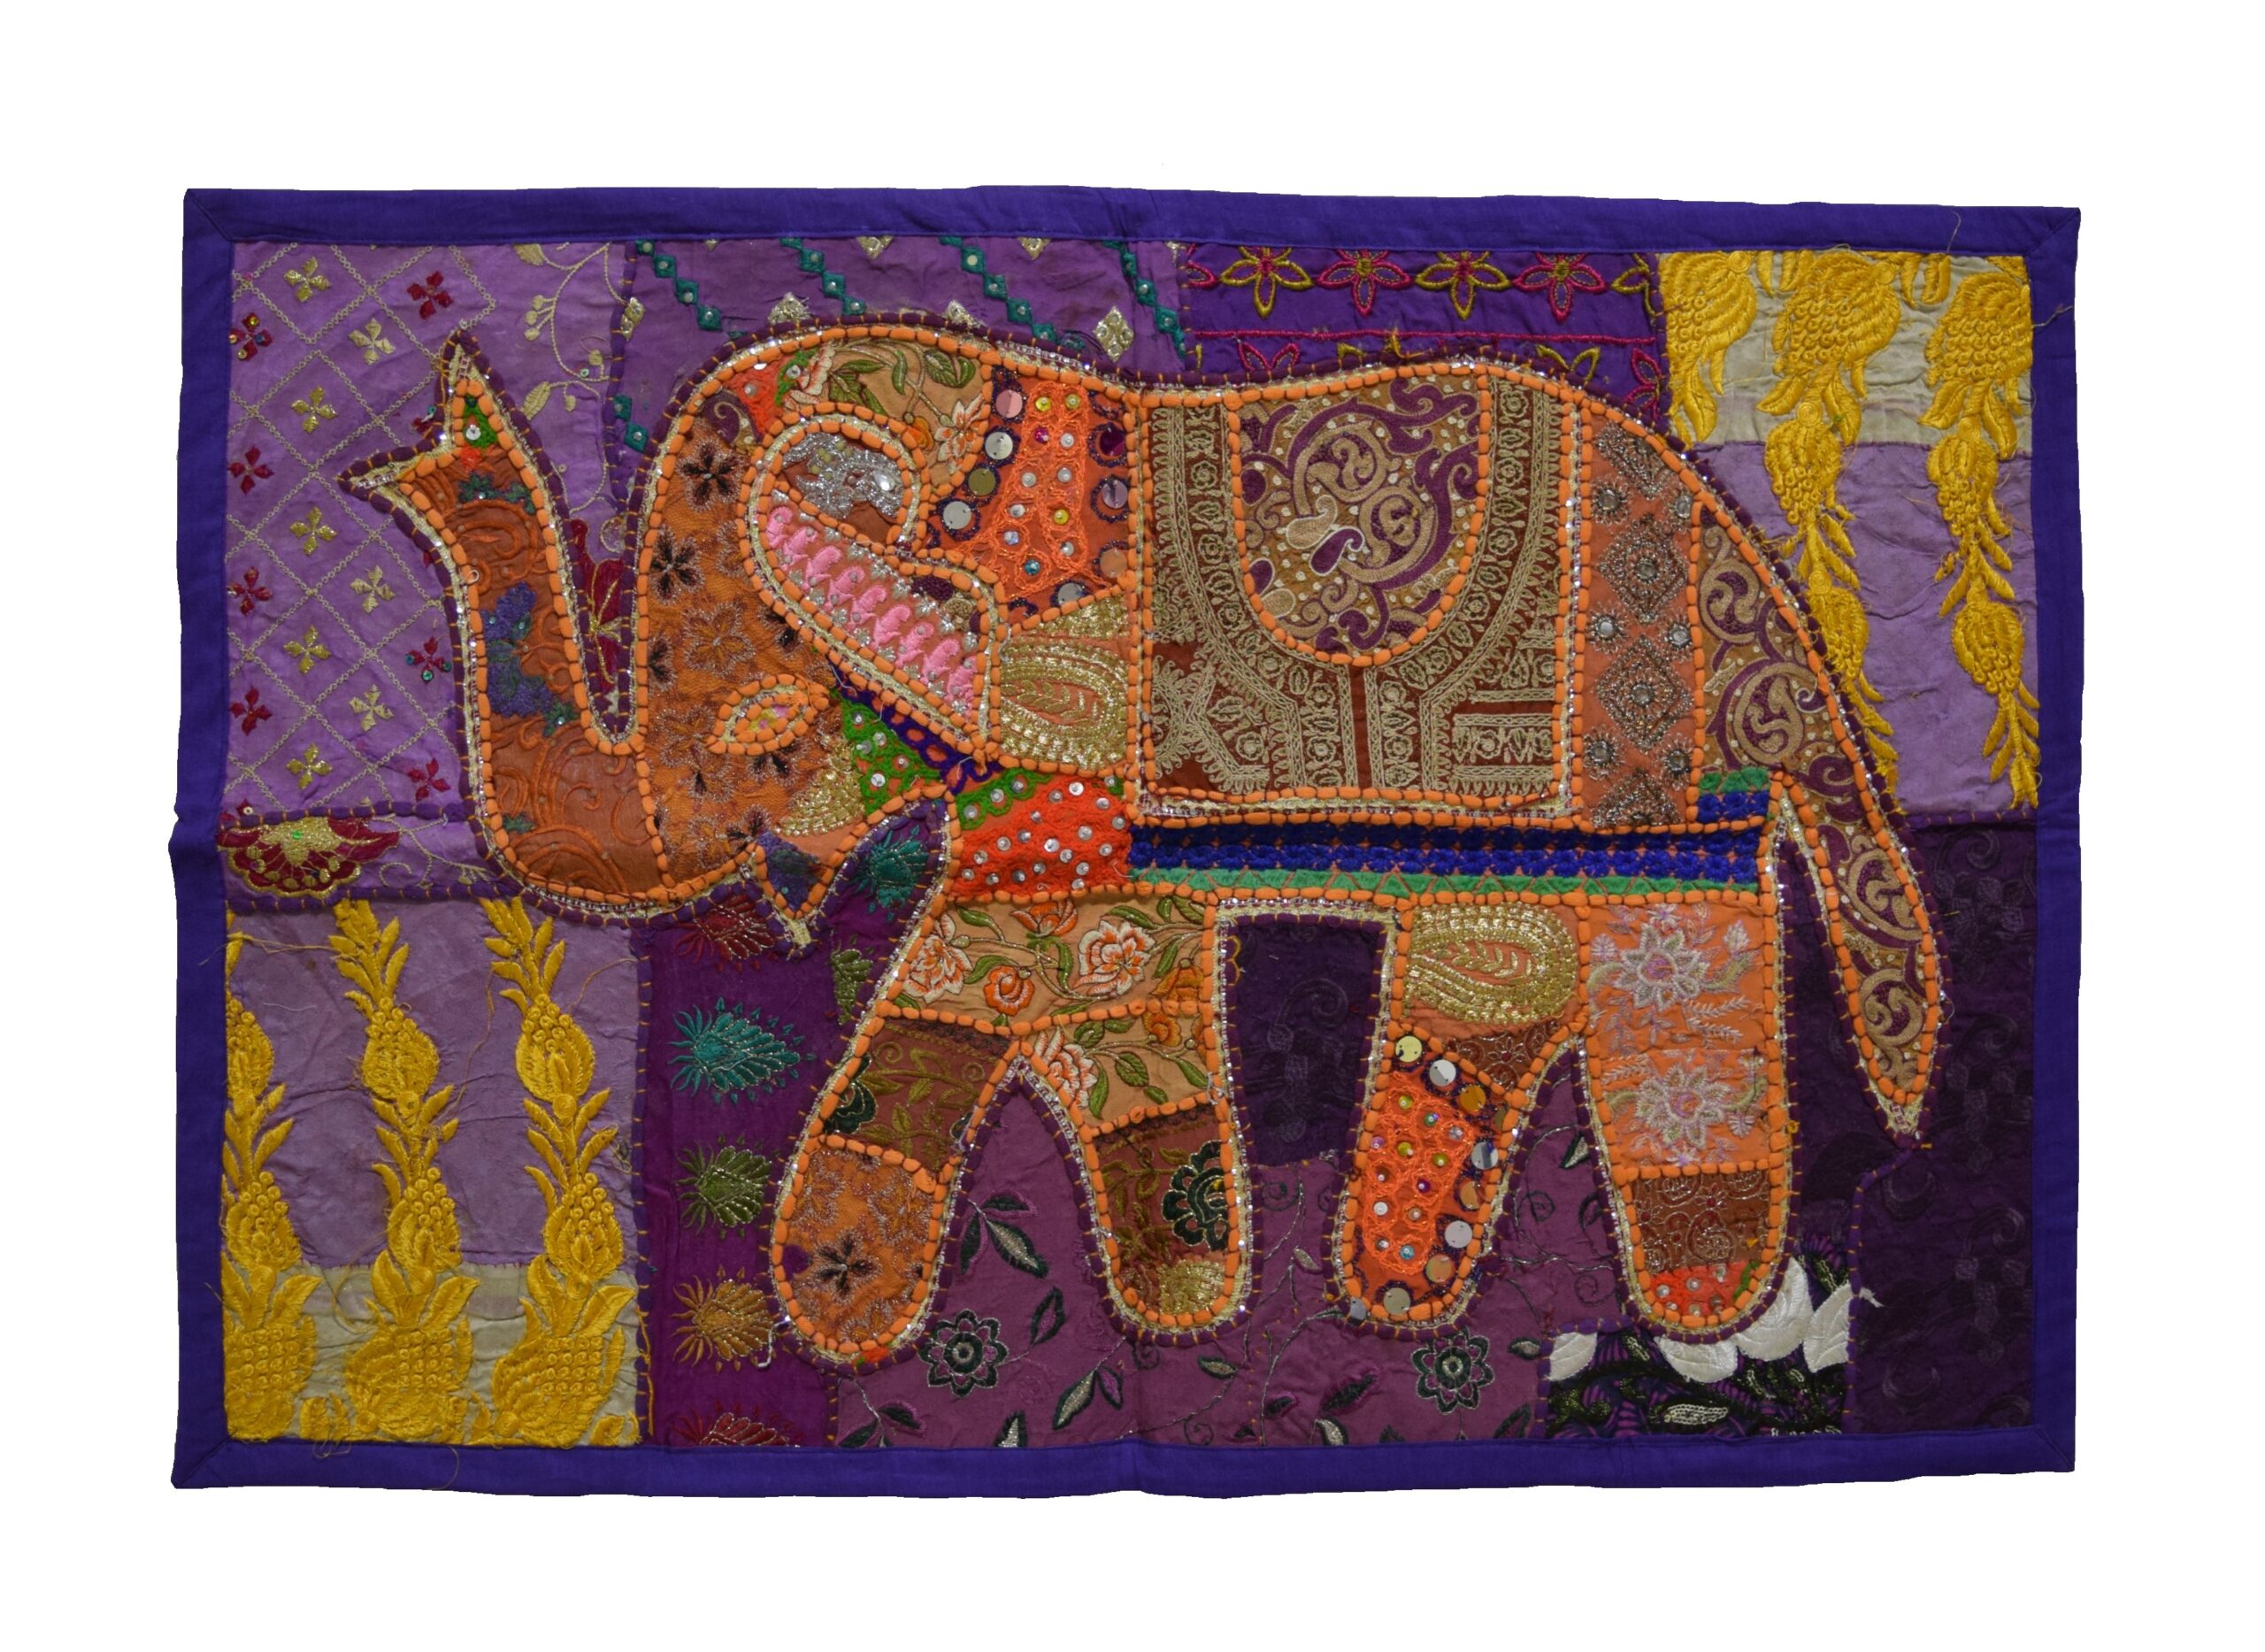 Handmade Embroidery work Unique Patchwork Elephant Design Hand Stitch Bed Cover Jeepsy Banjara Ethnic Tapestry Art